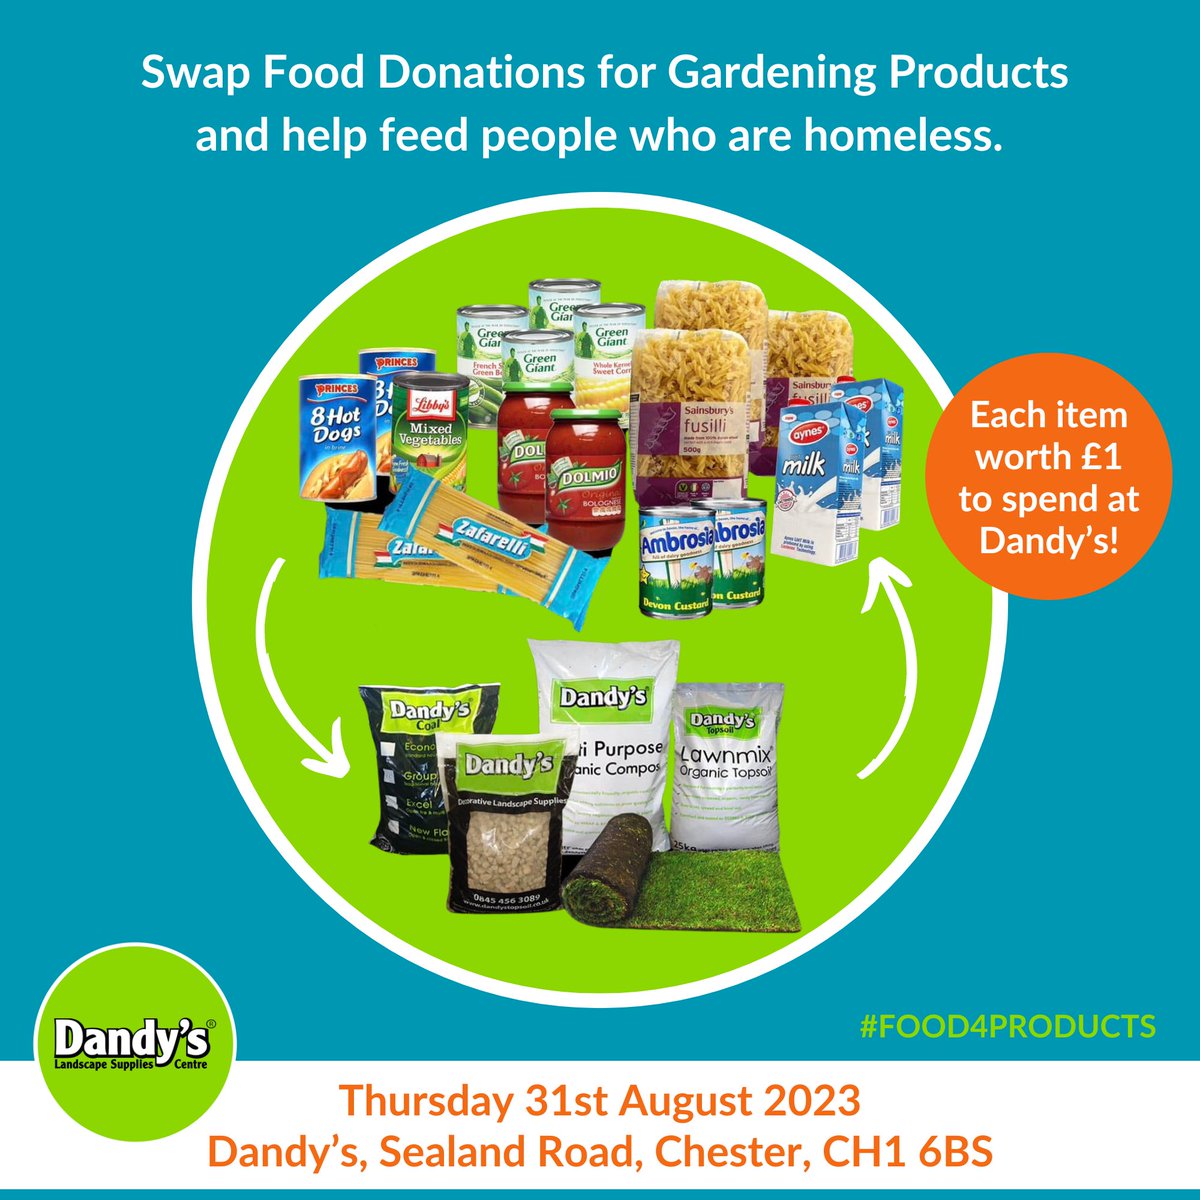 On Thursday 31st August, we will accept FOOD 4 PRODUCTS for your garden! 
Each item will be worth £1 to spend on any items collected from Dandy’s Landscape Supplies Centre, Sealand Rd, CH1 6BS. 

All food will be given to Chester’s ShareShop to feed people who are homeless.…